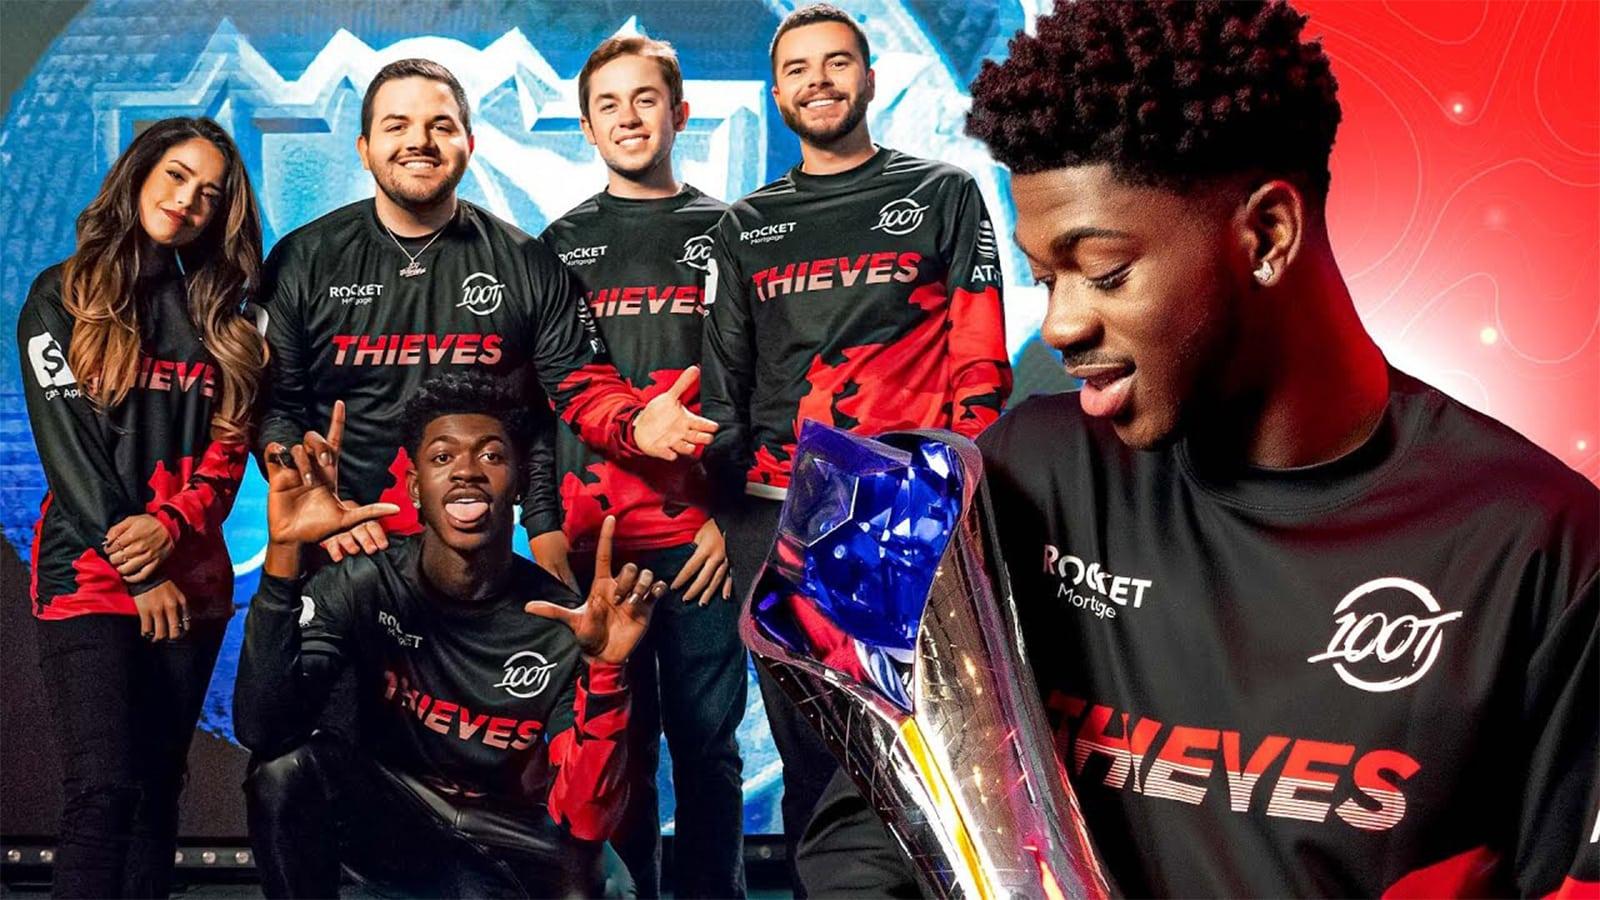 100 Thieves and Lil Nas X Worlds 2021 music video